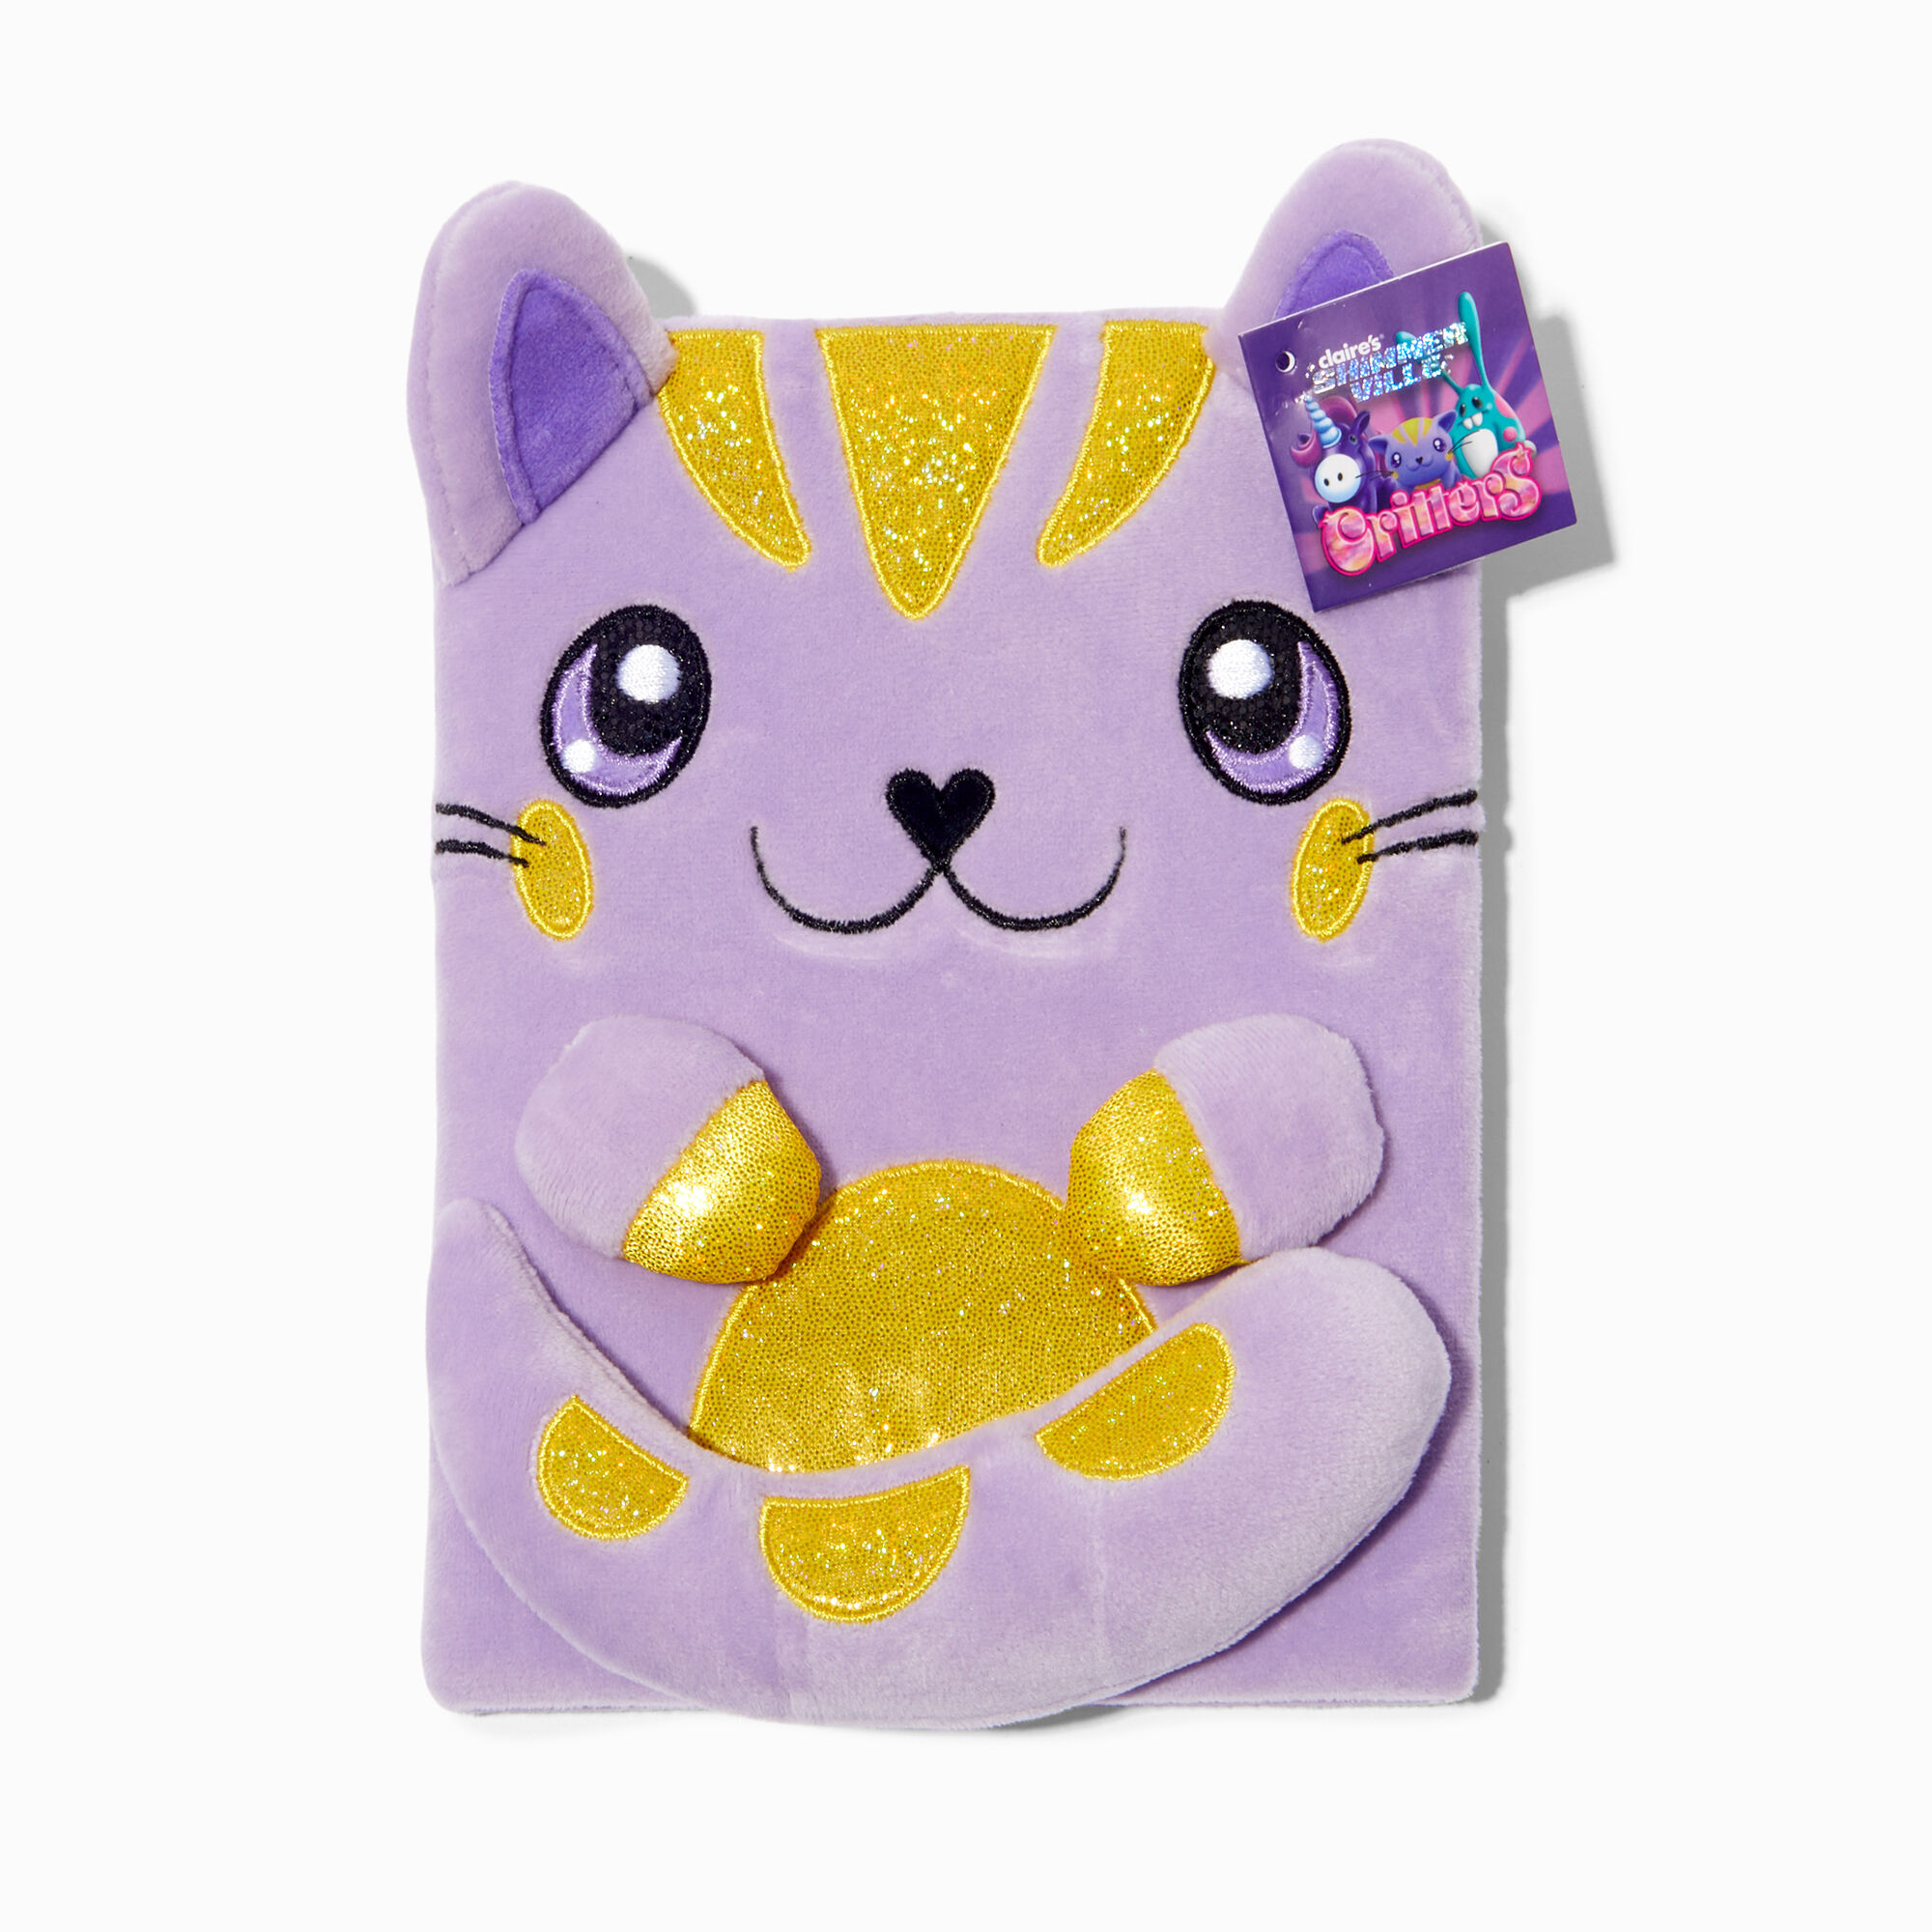 View Claires Shimmerville Stuffy Plush Notebook information